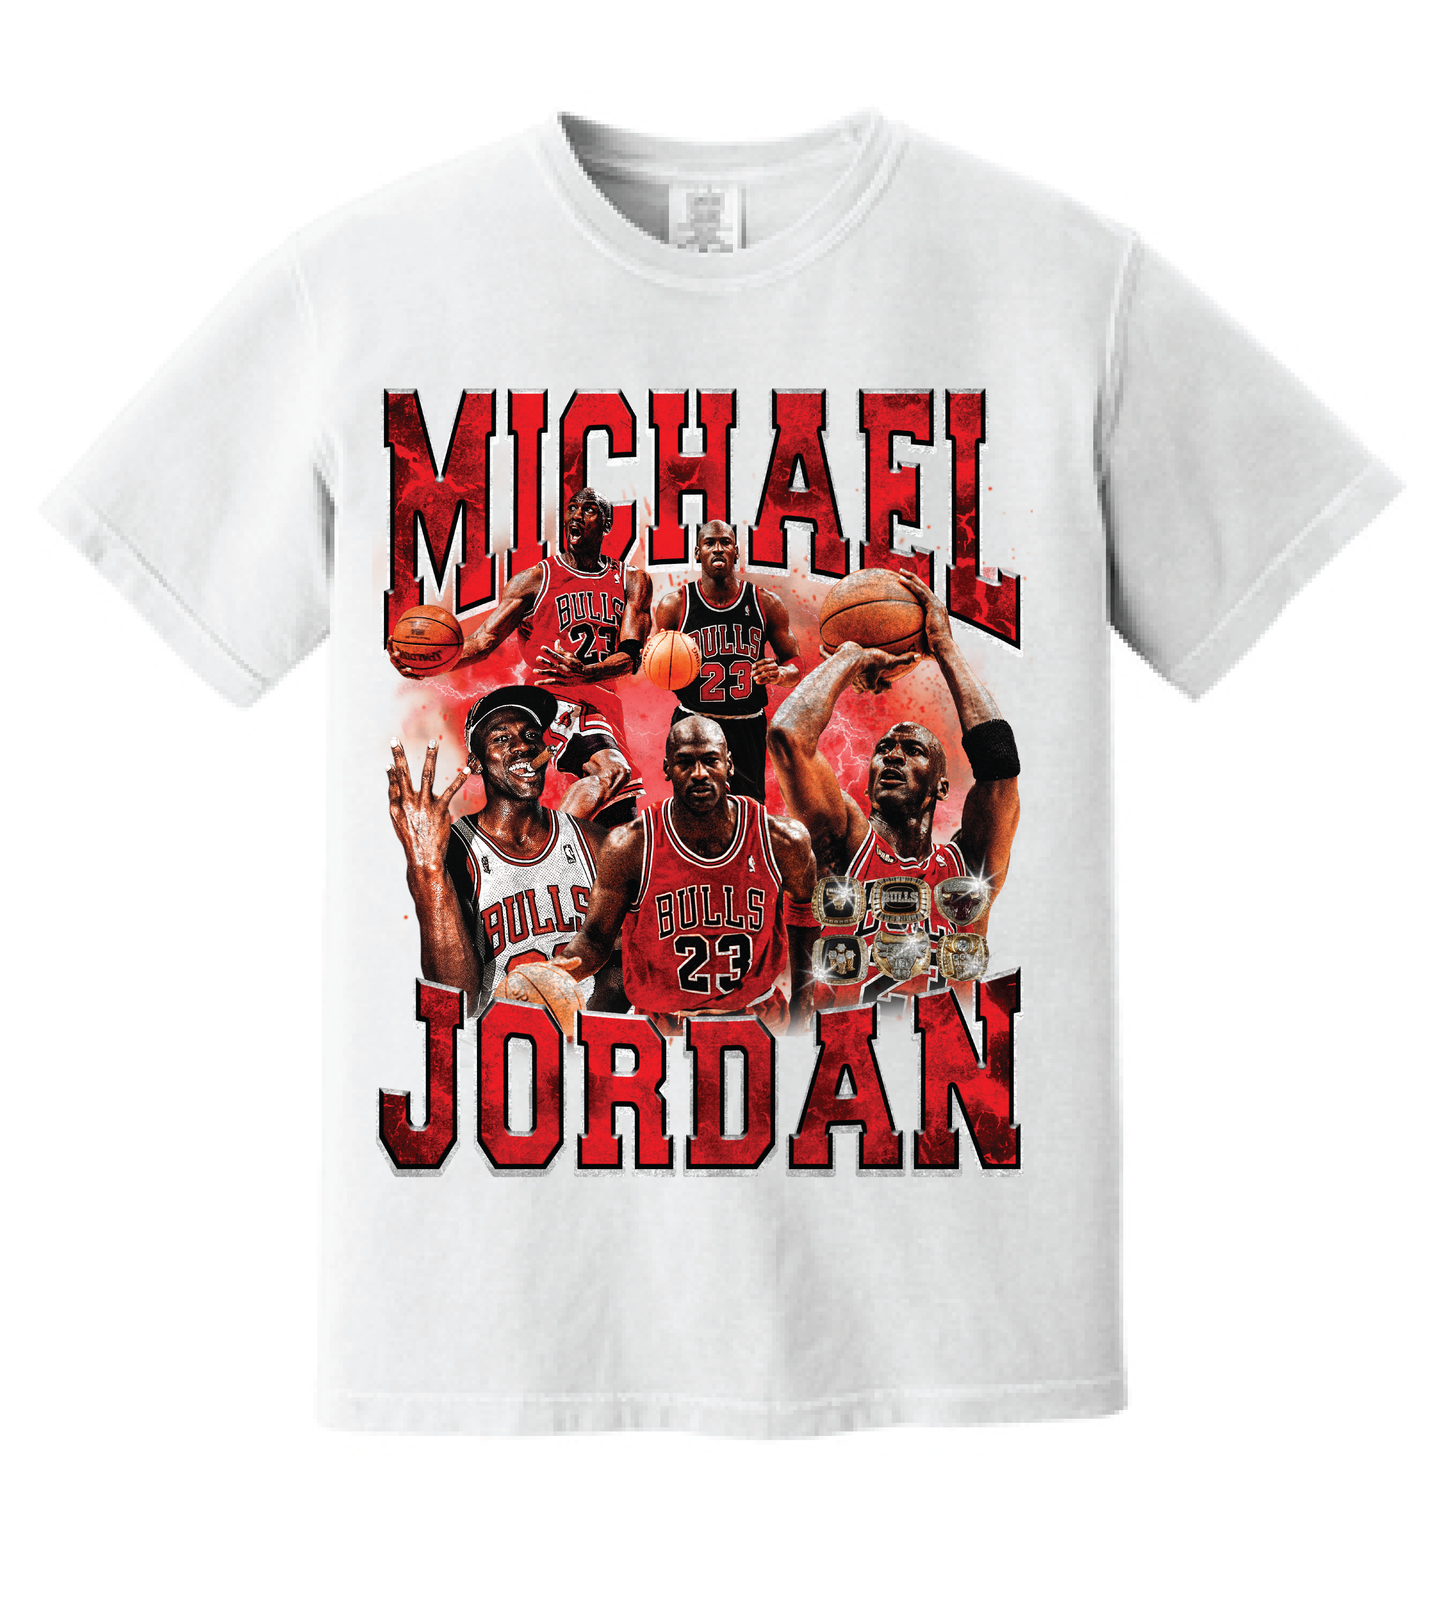 Step Up Your Game with this Michael Jordan Vintage 90's Style T-shirt